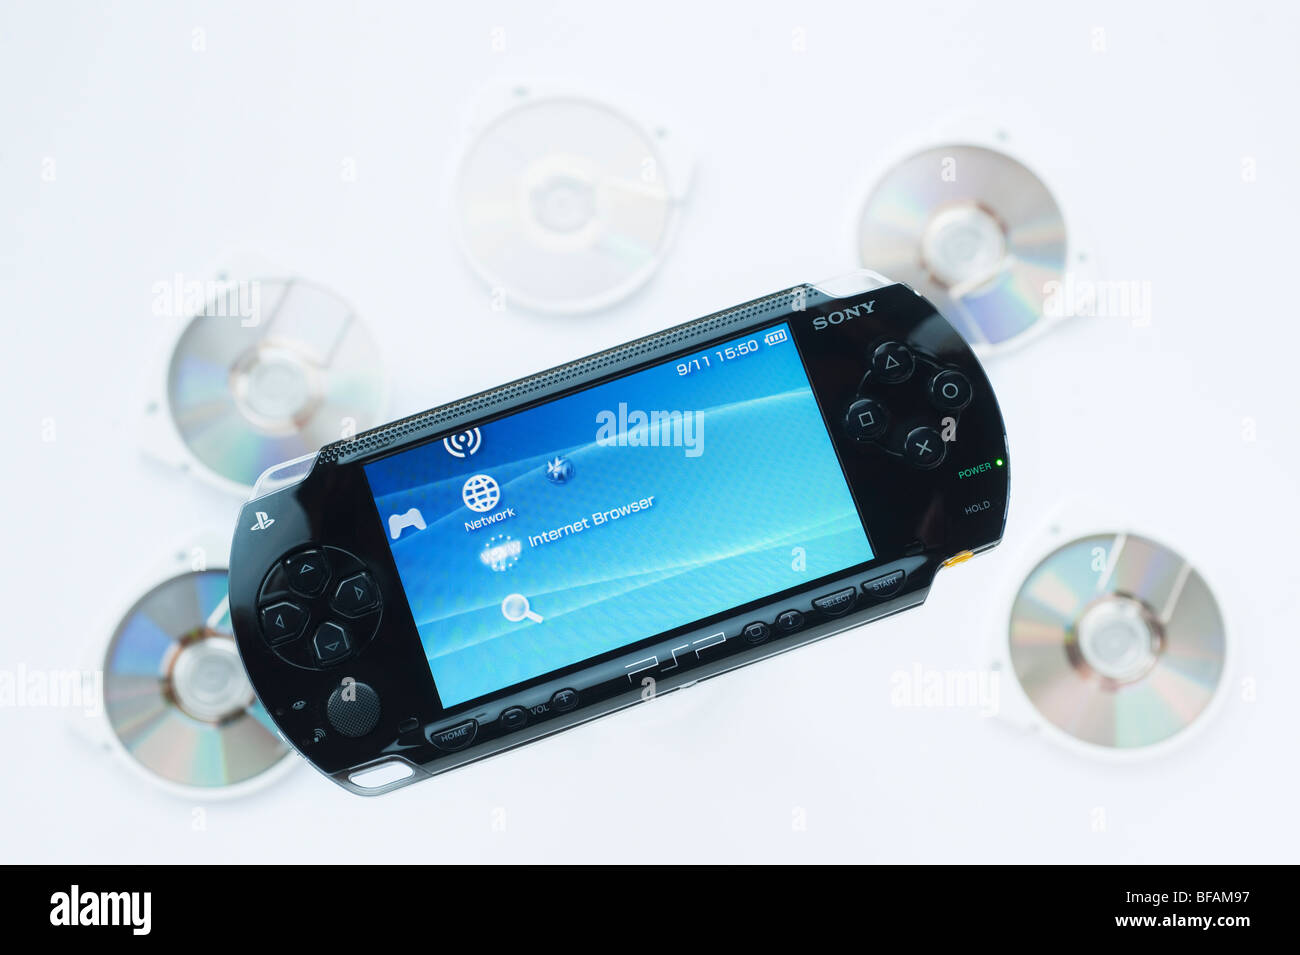 Sony psp with umd disks and internet browser access Stock Photo